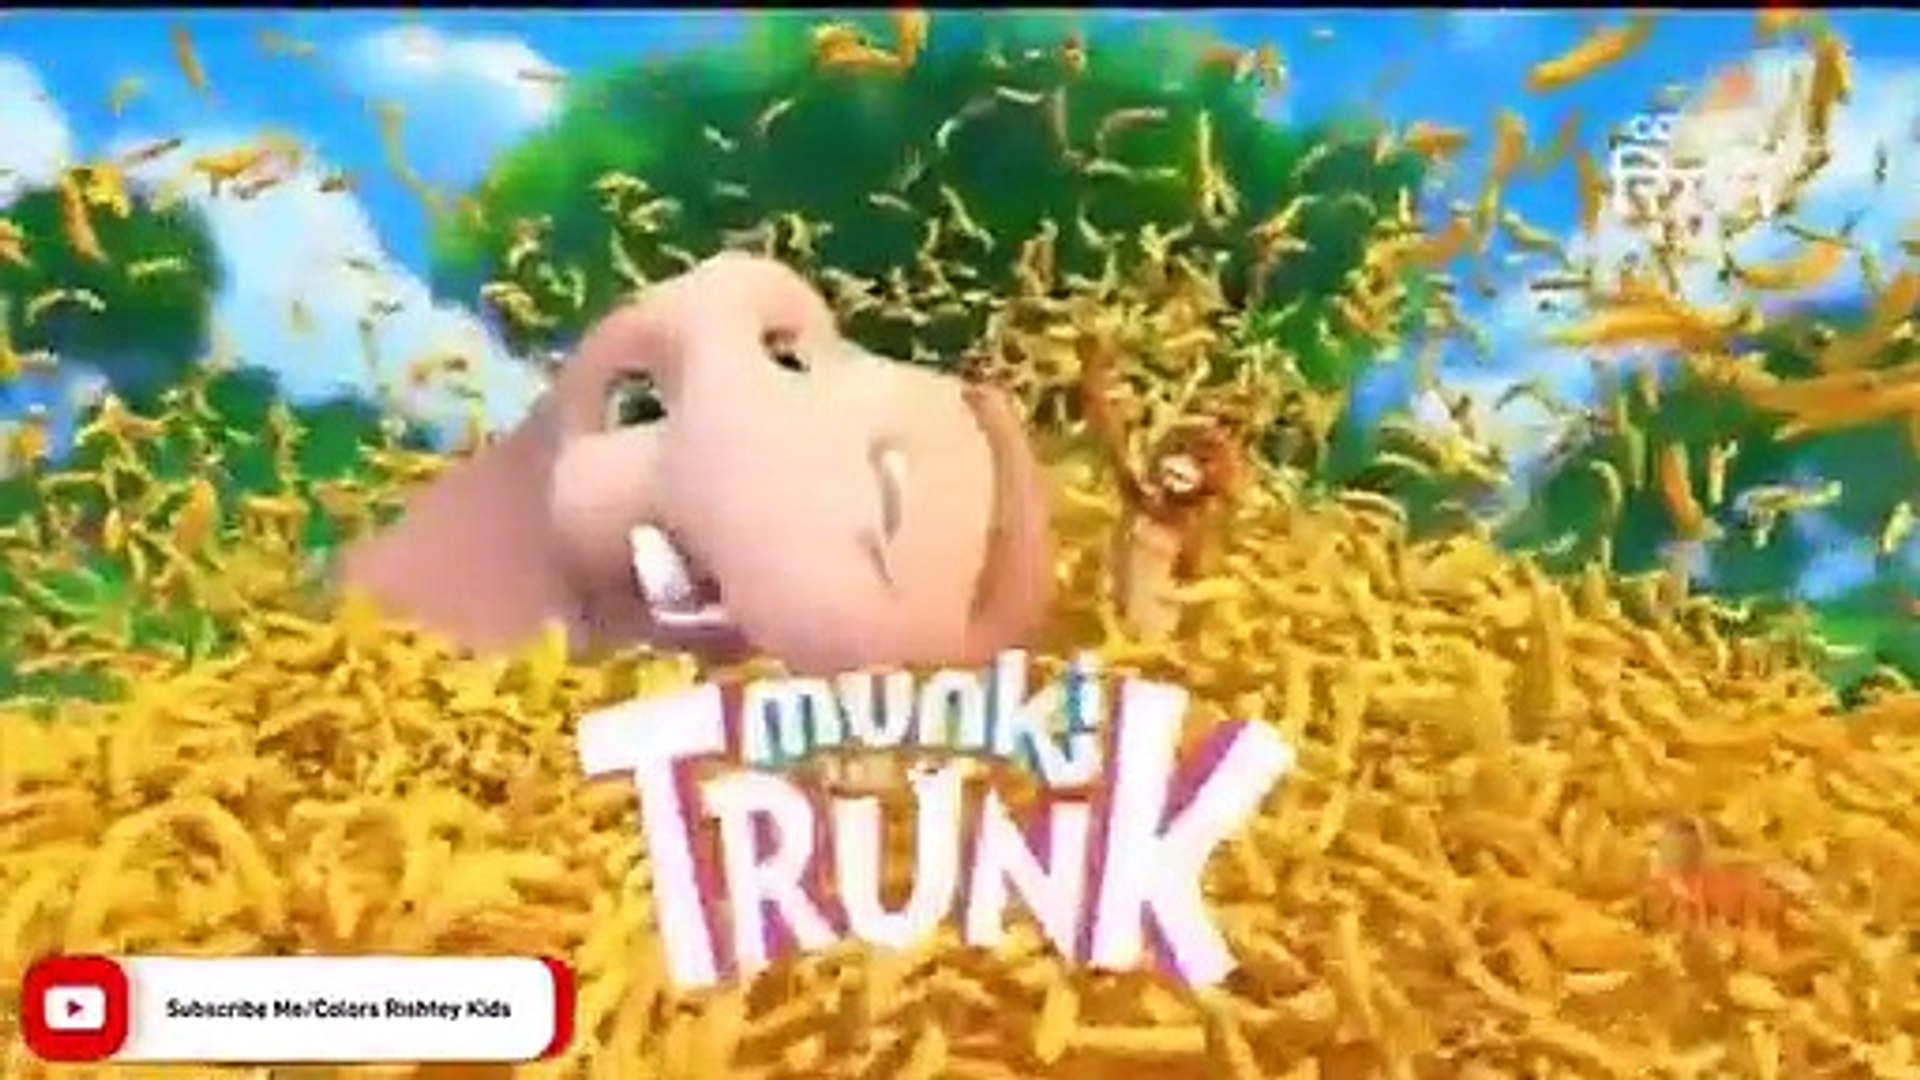 Monkey And Trunk in Hindi_Munki And Trunk new episode Pakdam pakdai in  Hindi_Pakdam pakdai new video - video Dailymotion